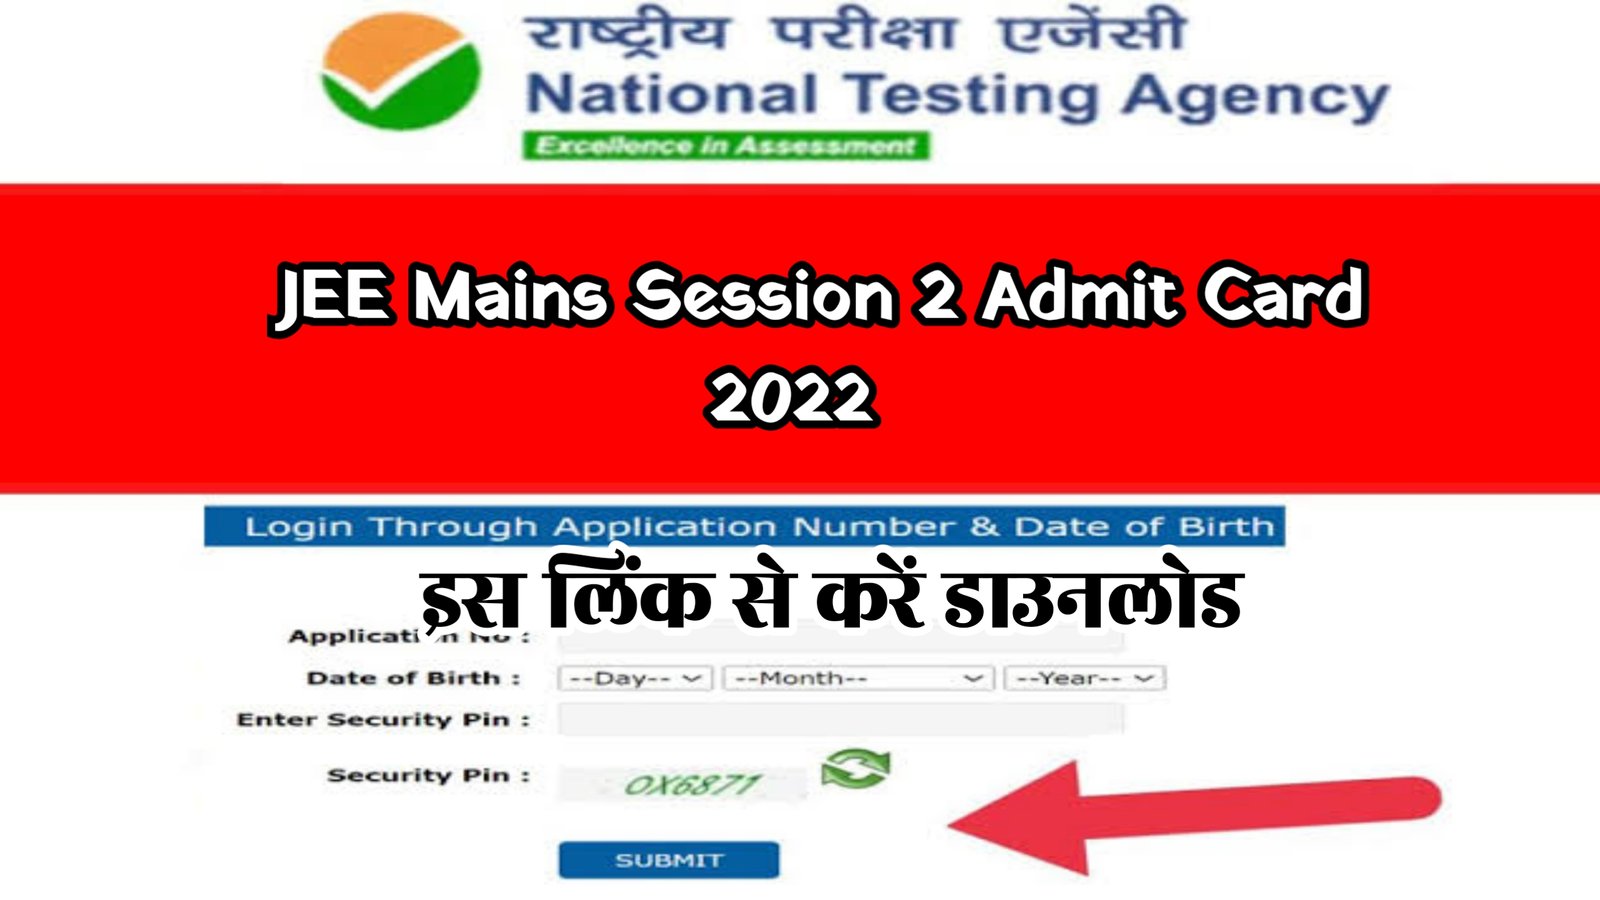 JEE Mains Session 2 Admit Card 2022 Download Link : Check Now @jeemain.nta.nic.in